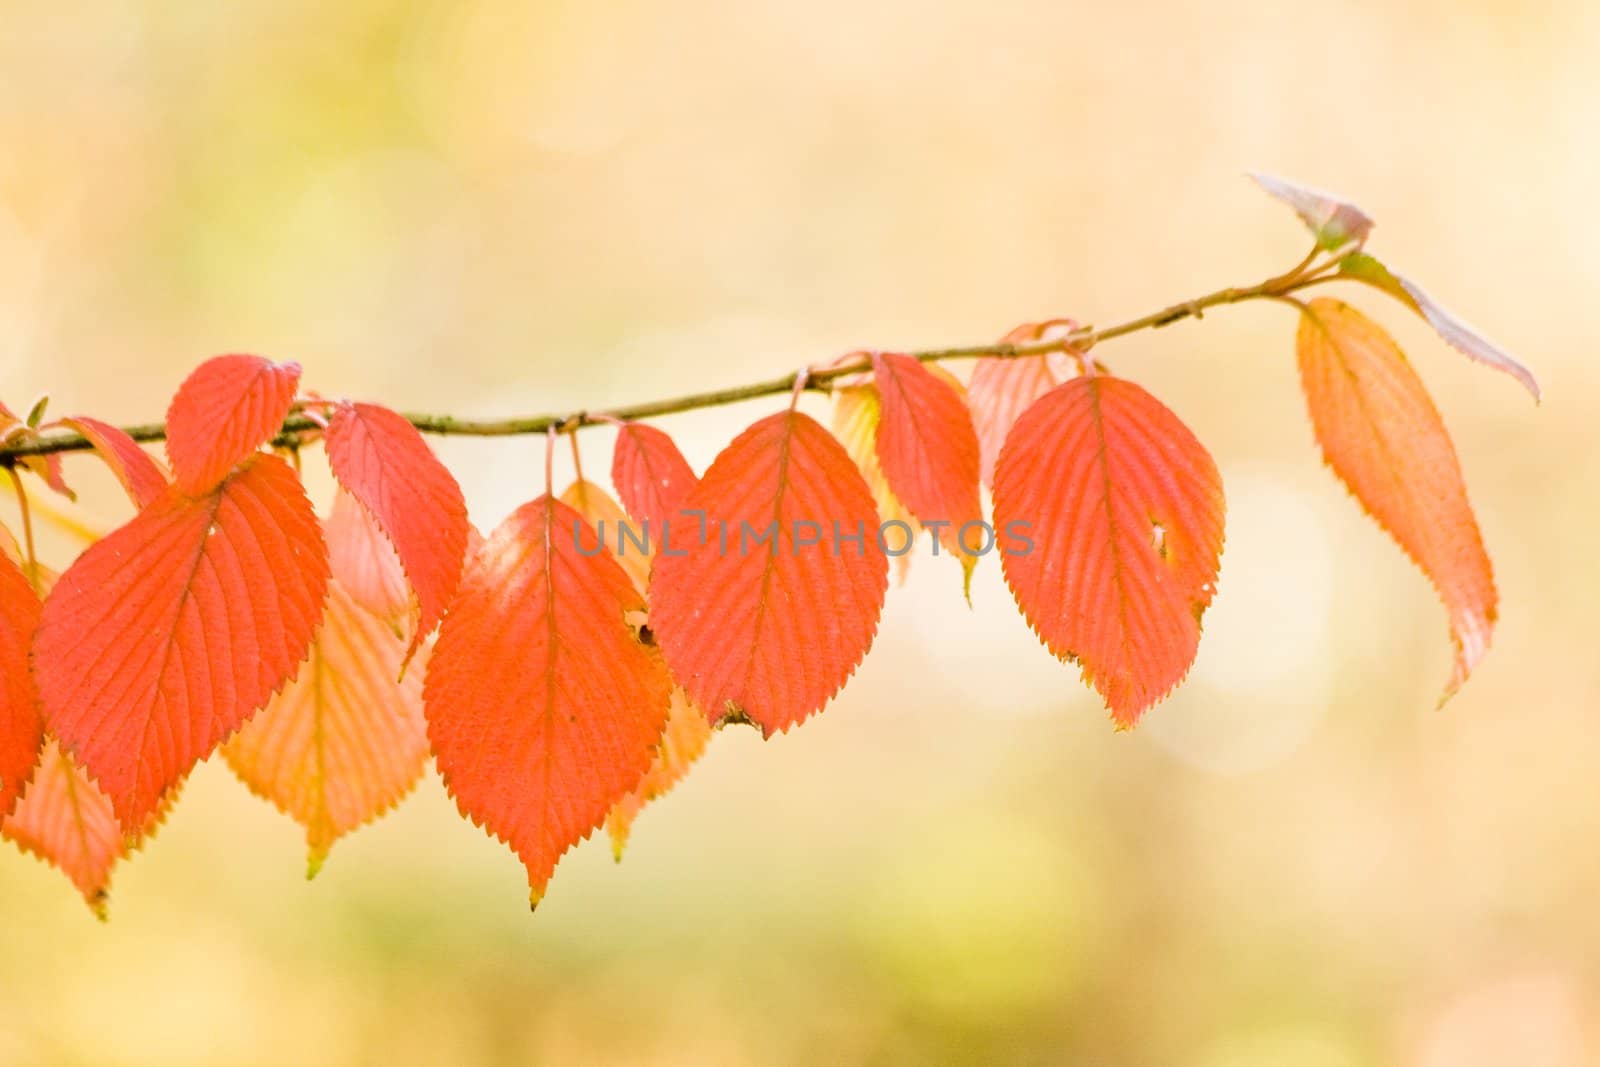 Autumn leaves on cherry tree by Colette